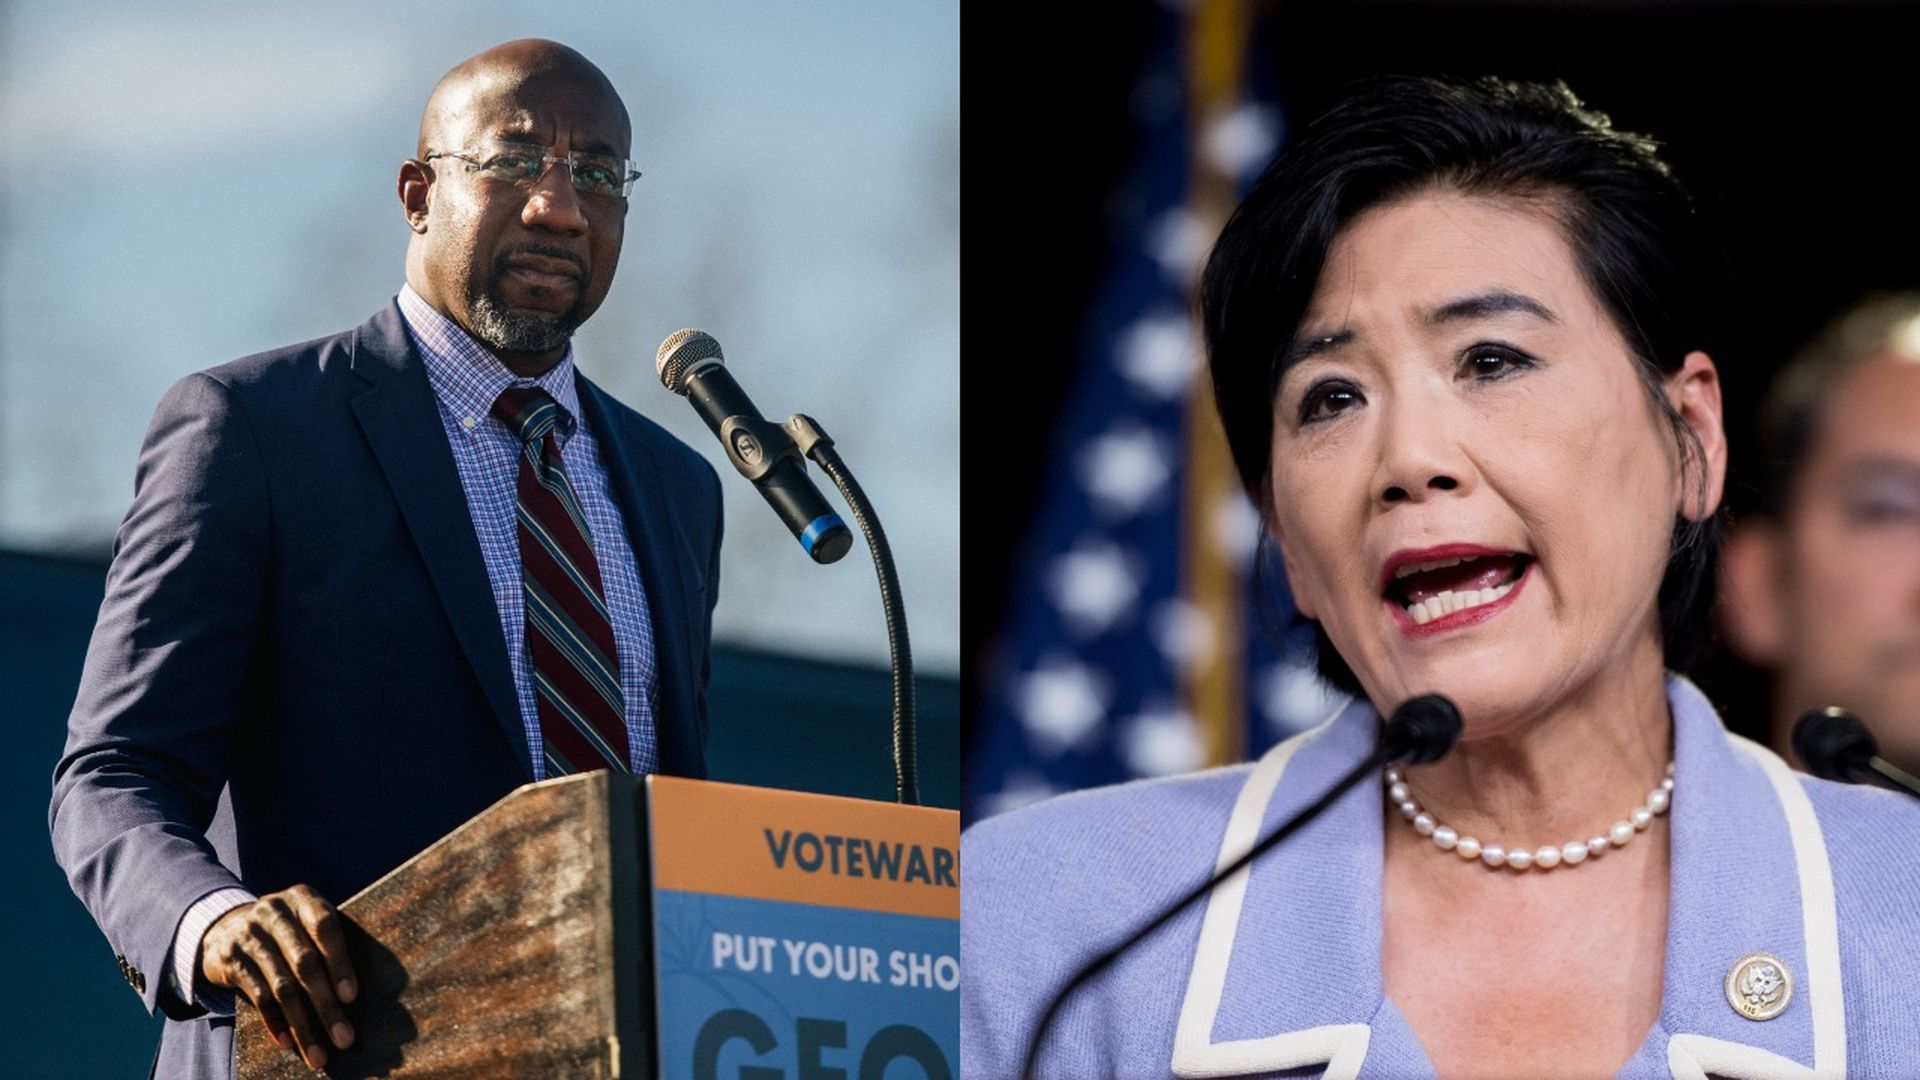 Photo of Raphael Warnock on the left and Judy Chu on the right